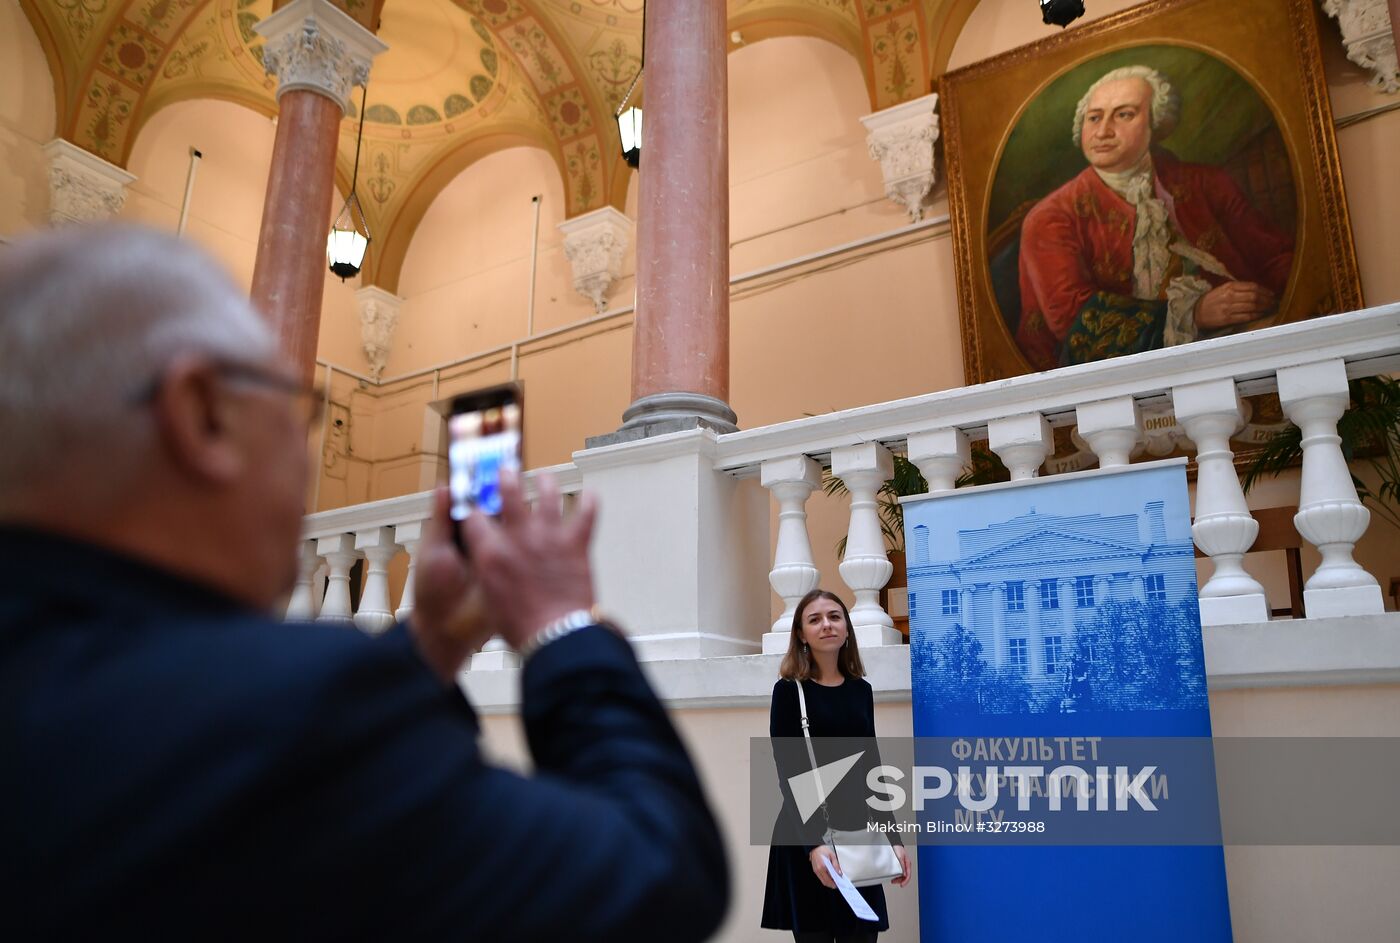 Moscow State University's Department of Journalism holds Open Doors Day